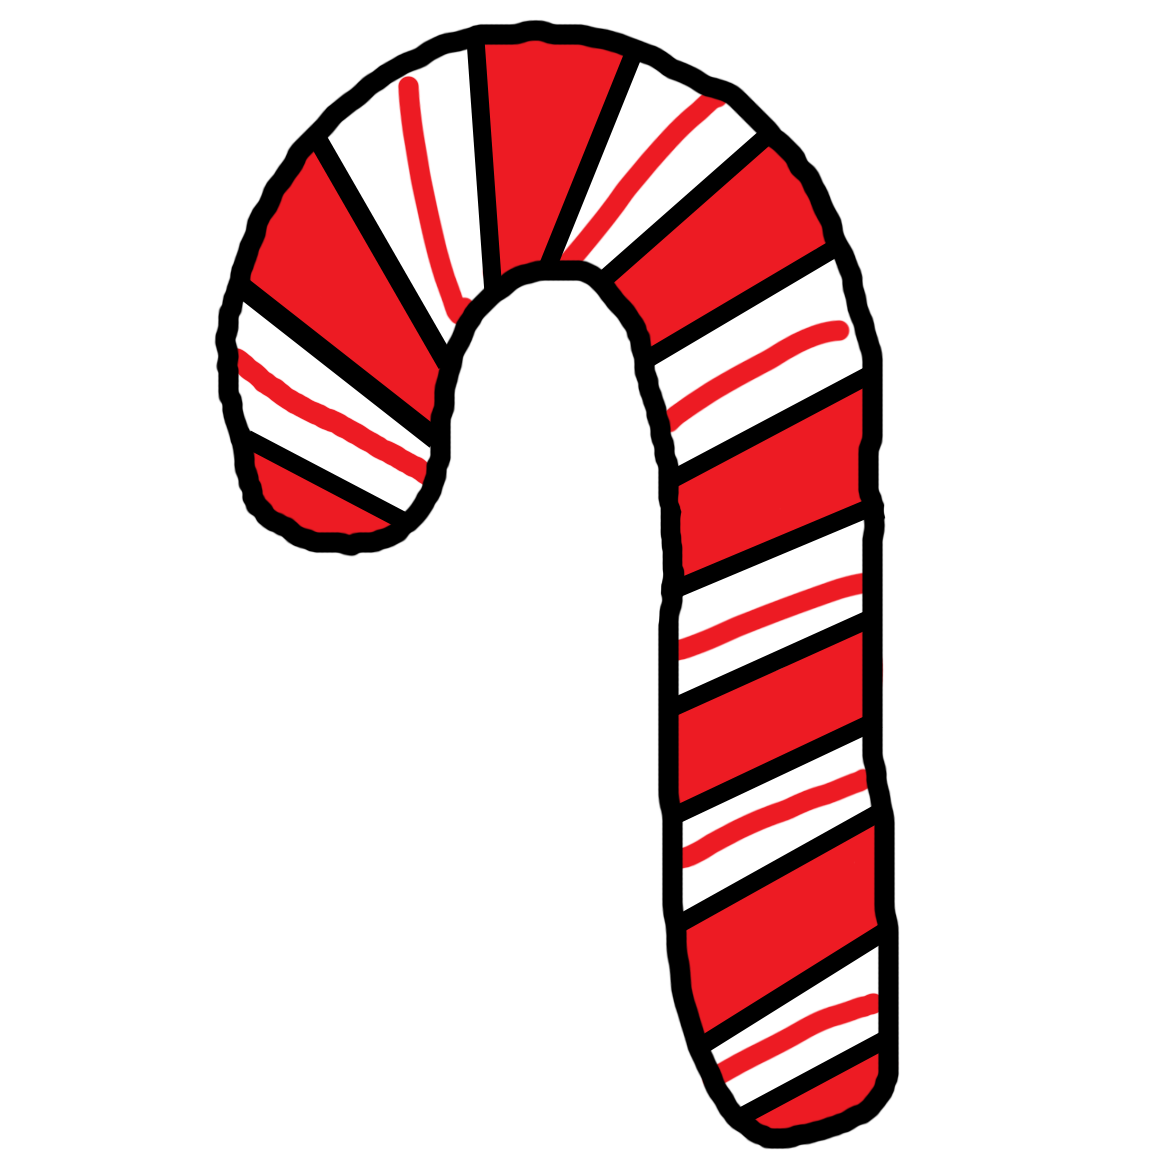 Candy Cane Drawing Tutorial